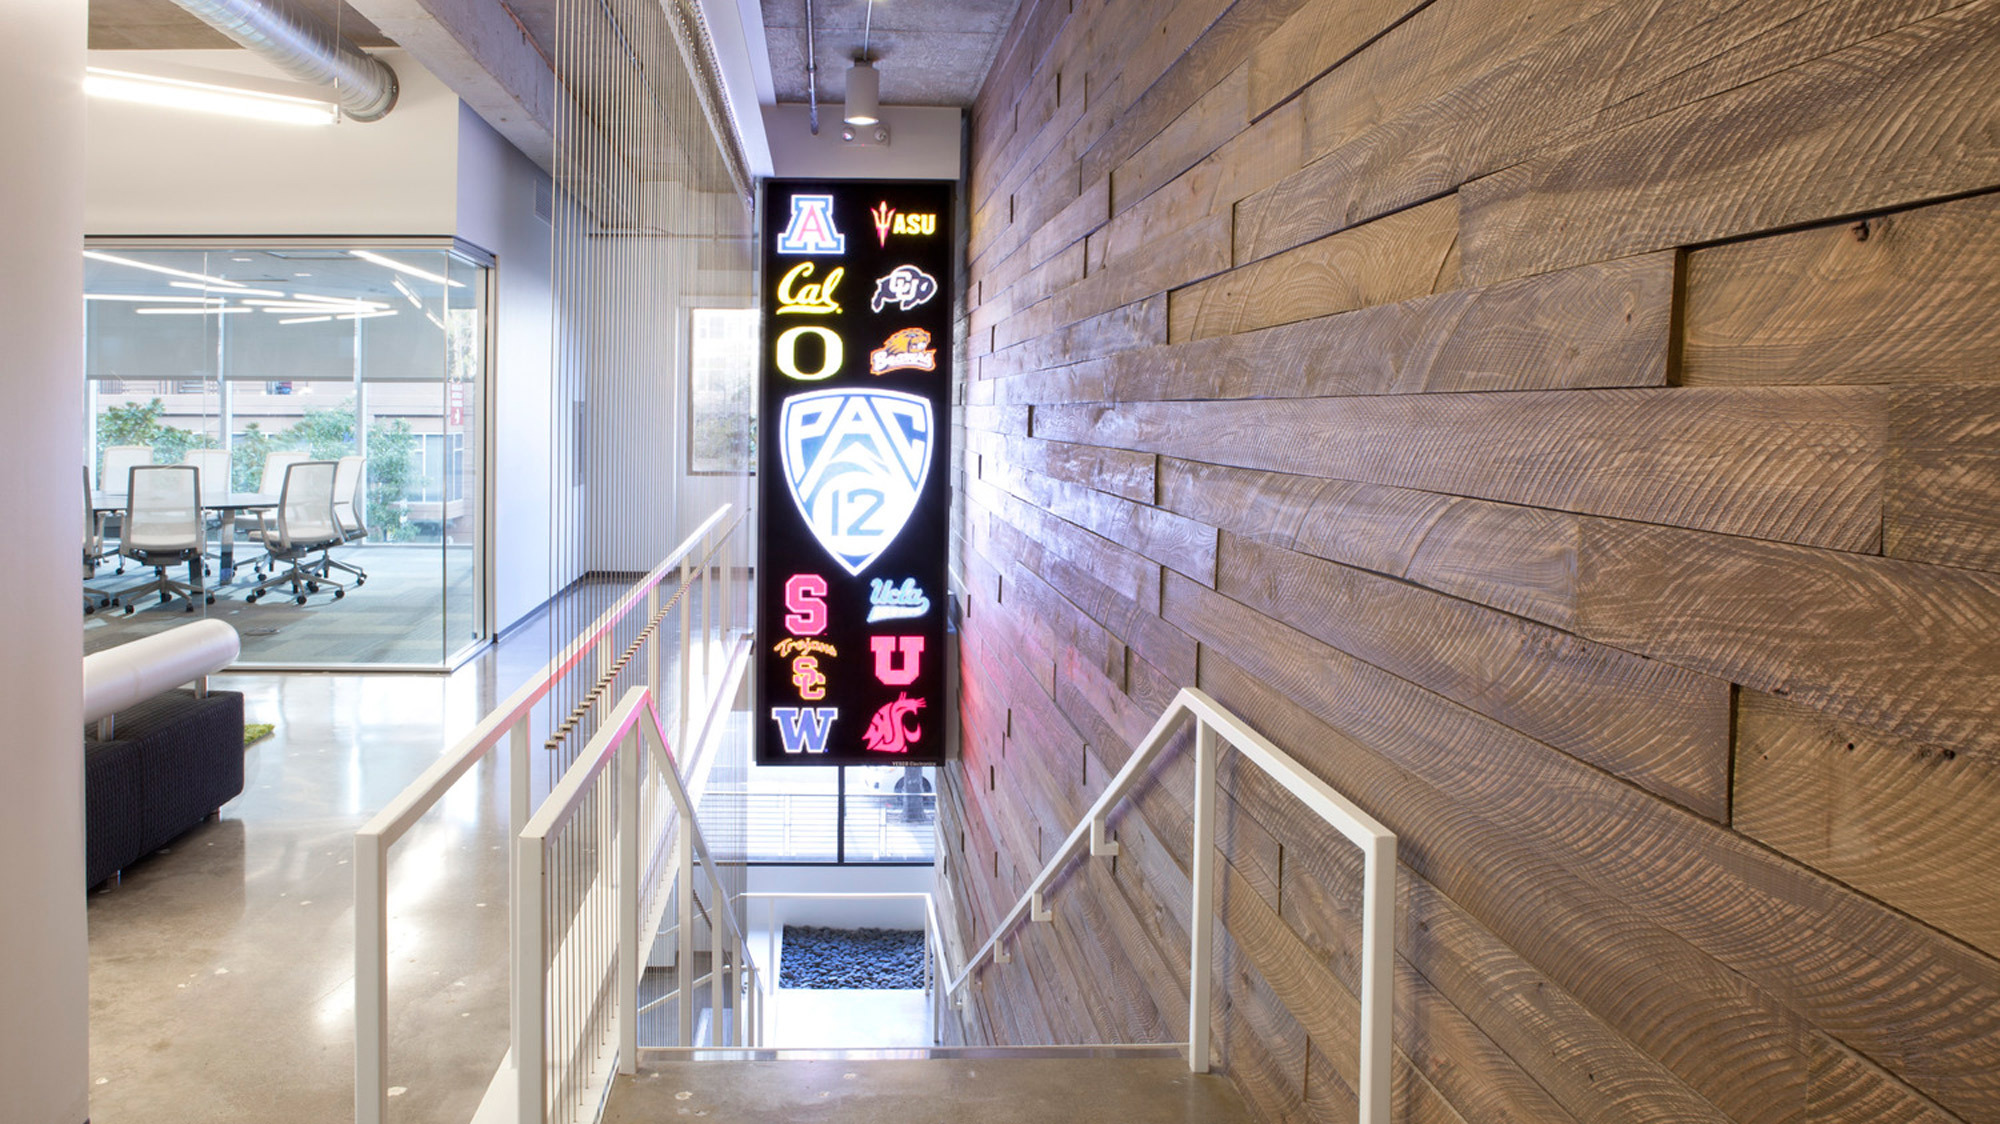 Contemporary office stairwell with reclaimed wood wall cladding and collection of vibrant college sports team neon signs, exhibiting a blend of rustic textures and modern collegiate pride, leading to an airy workspace with glass partitions.